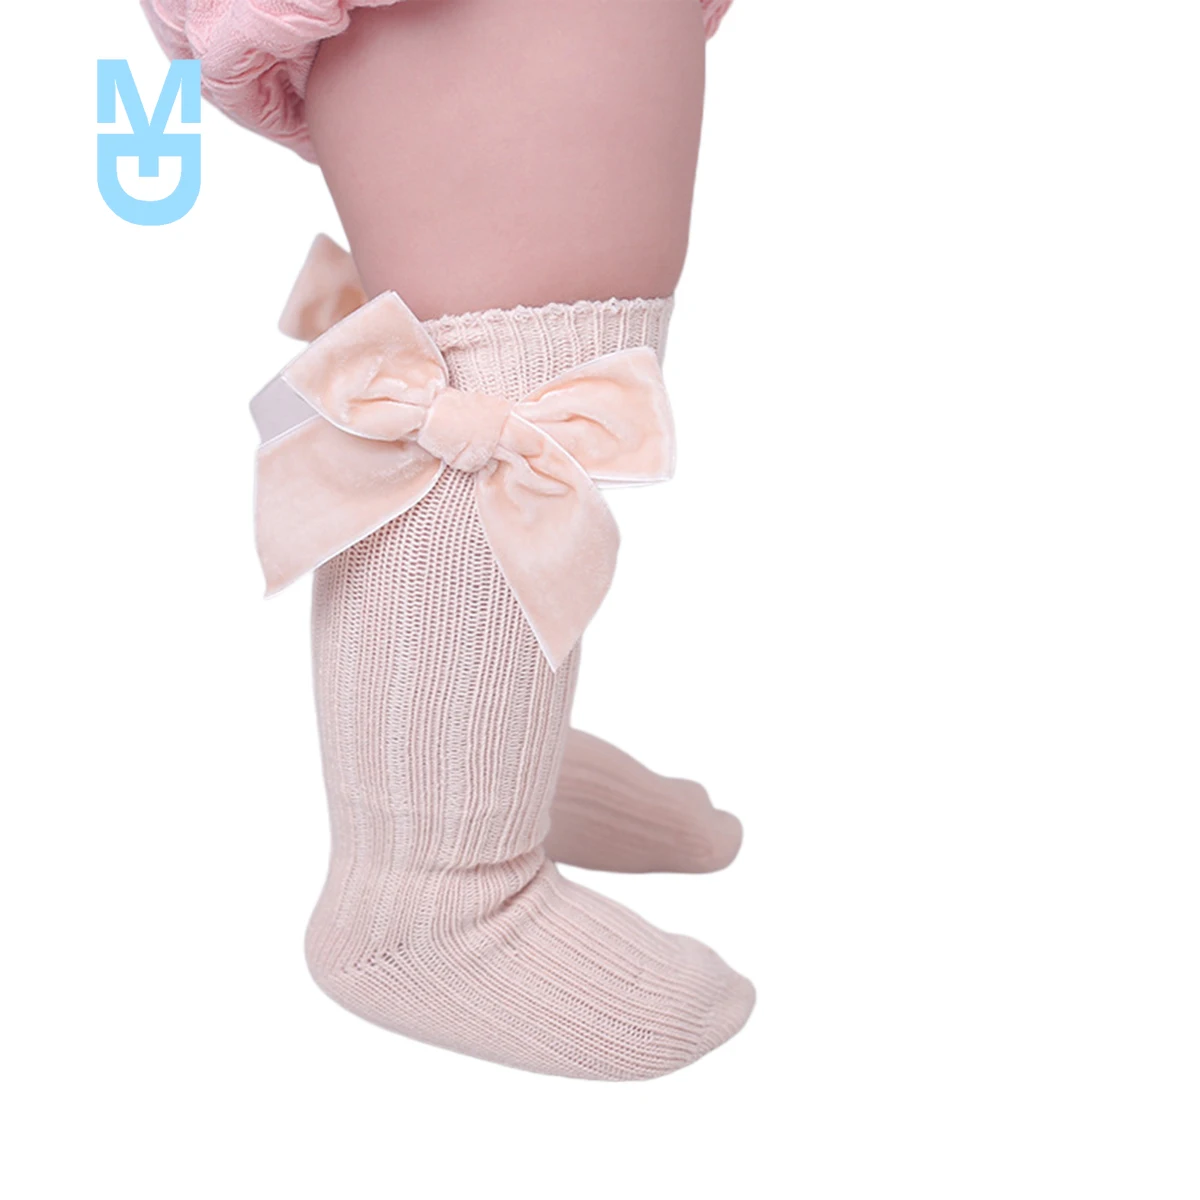 

New Baby Girl Knee High Rib Stockings Winter Warm Combed Cotton Knitted Stockings with Big Velvet Bow for Infants Toddlers 1-3Y